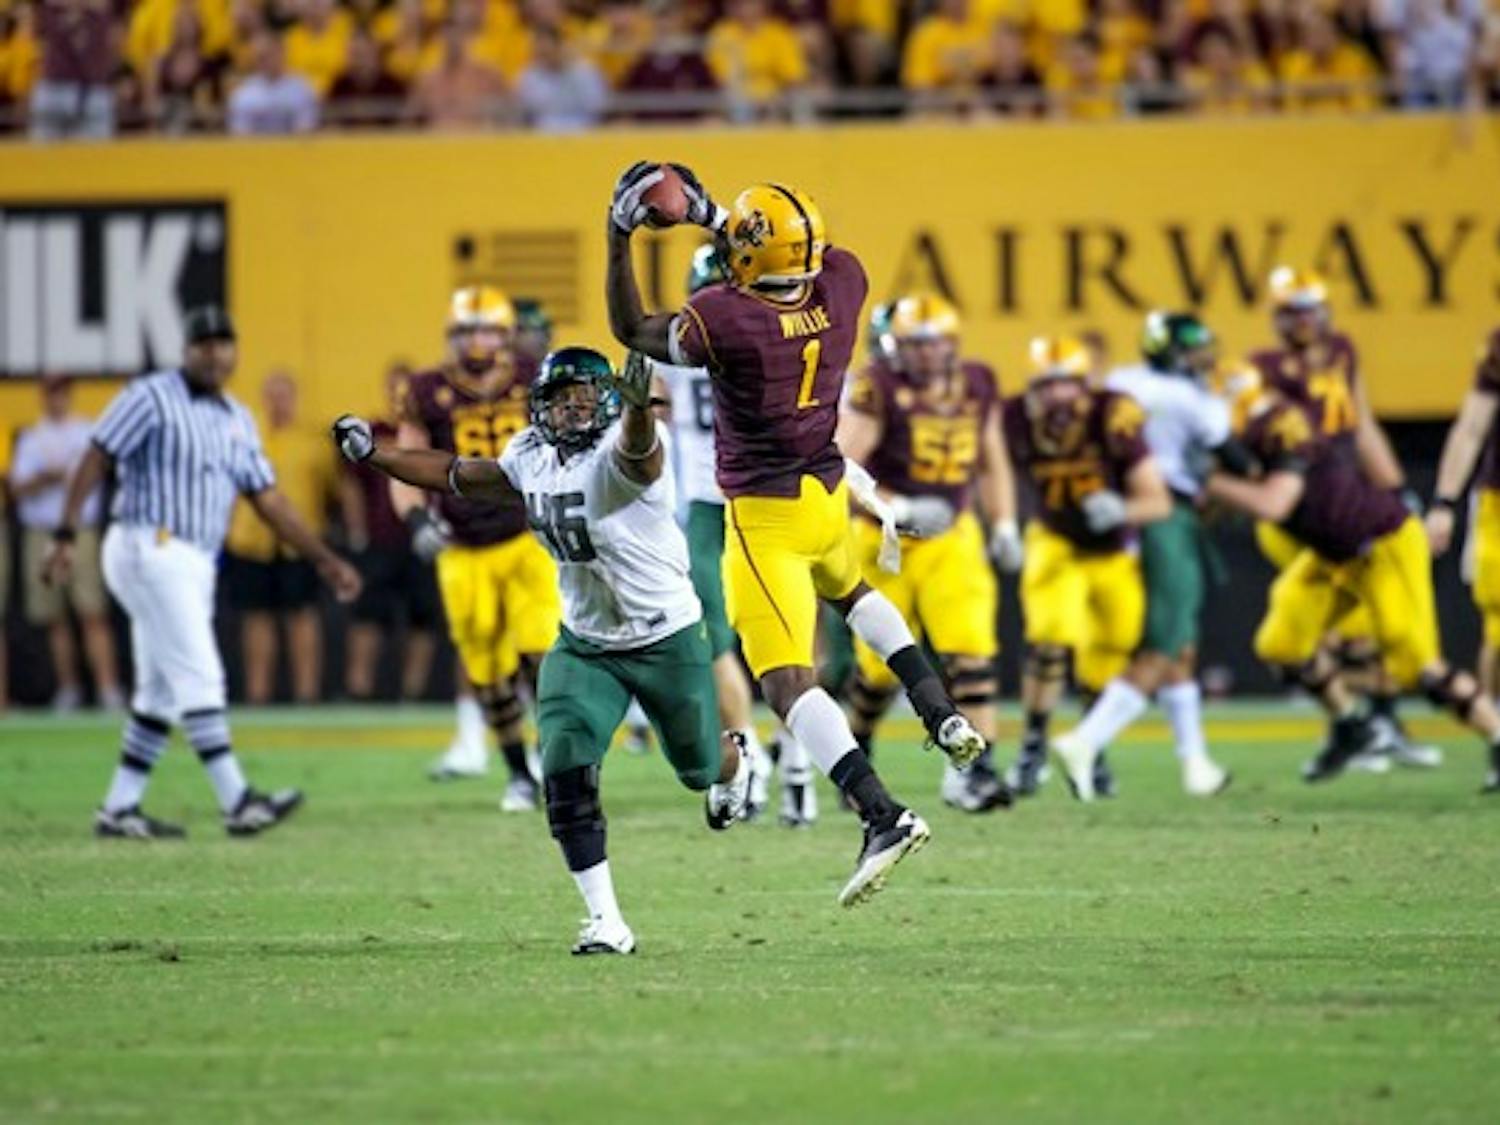 TURN AND GRAB: ASU senior wide receiver Mike Willie makes a catch during the Sun Devil’s loss to Oregon last year. The play of ASU’s receiving corps will be a big factor on Saturday. (Photo by Michael Arellano)